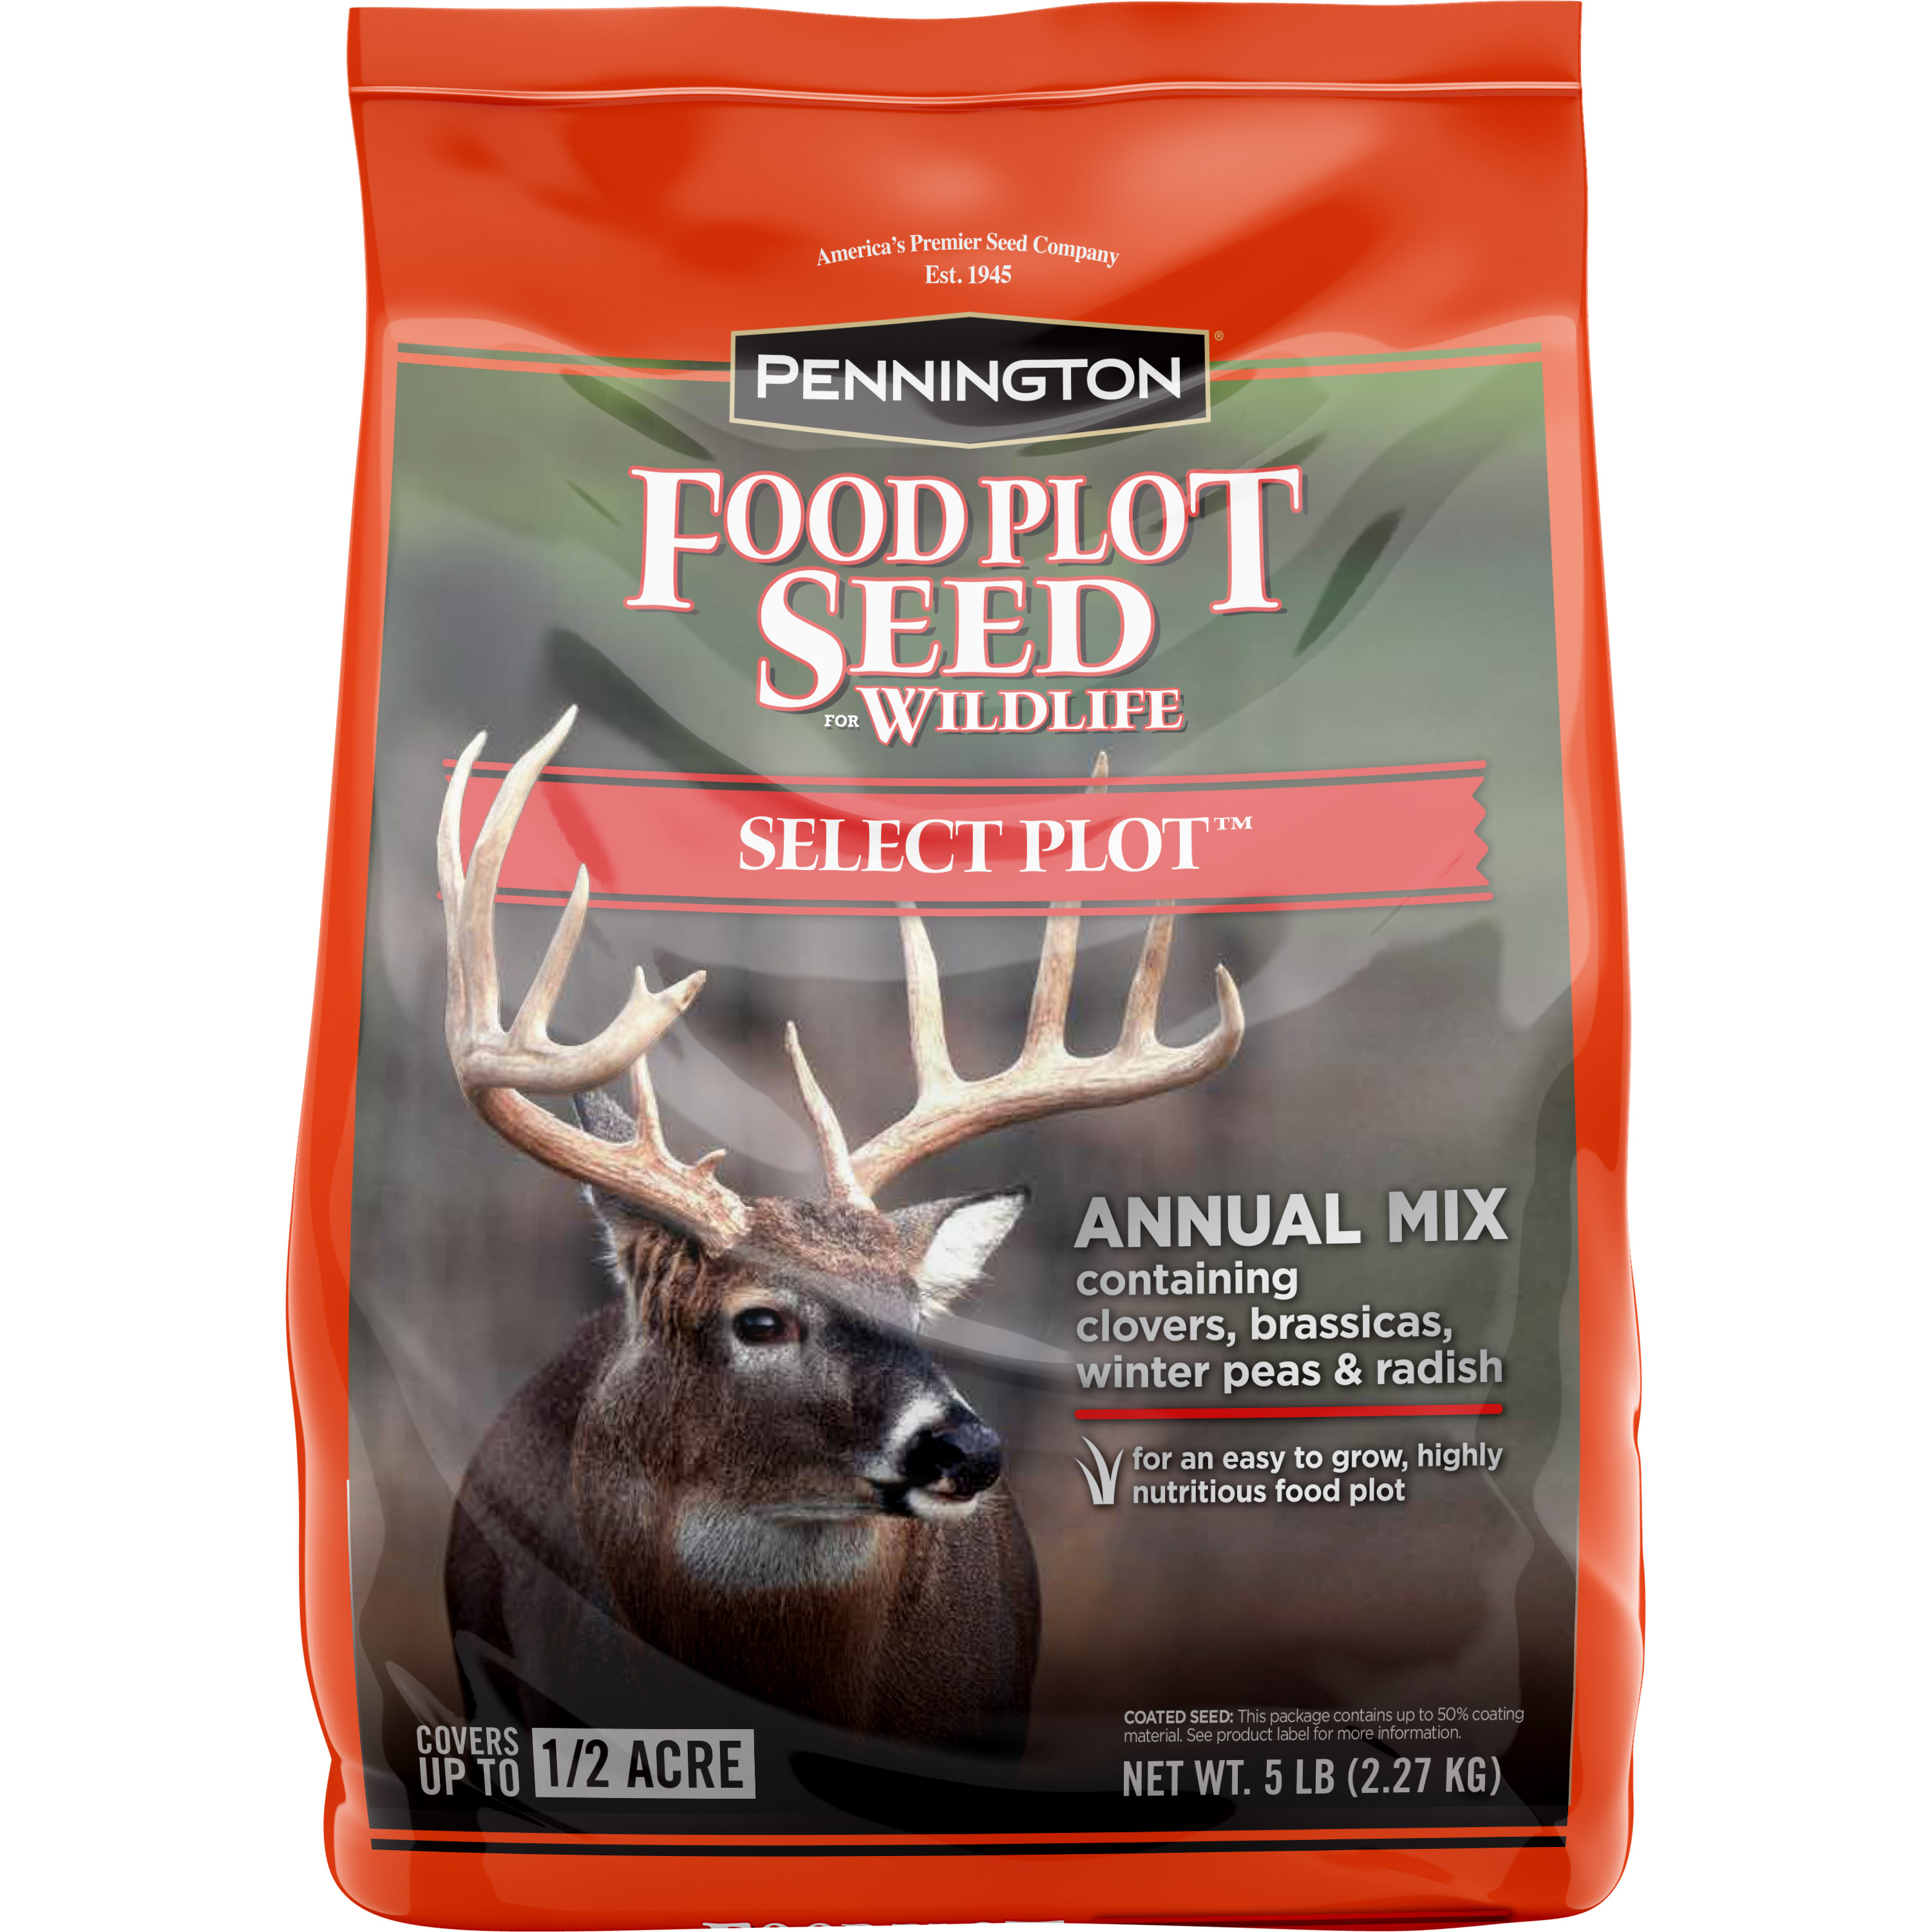 Pennington Food Plot Seed for Wildlife Select Plot Blend, 5 lb. Bag Covers up to ½ Acre - image 1 of 10